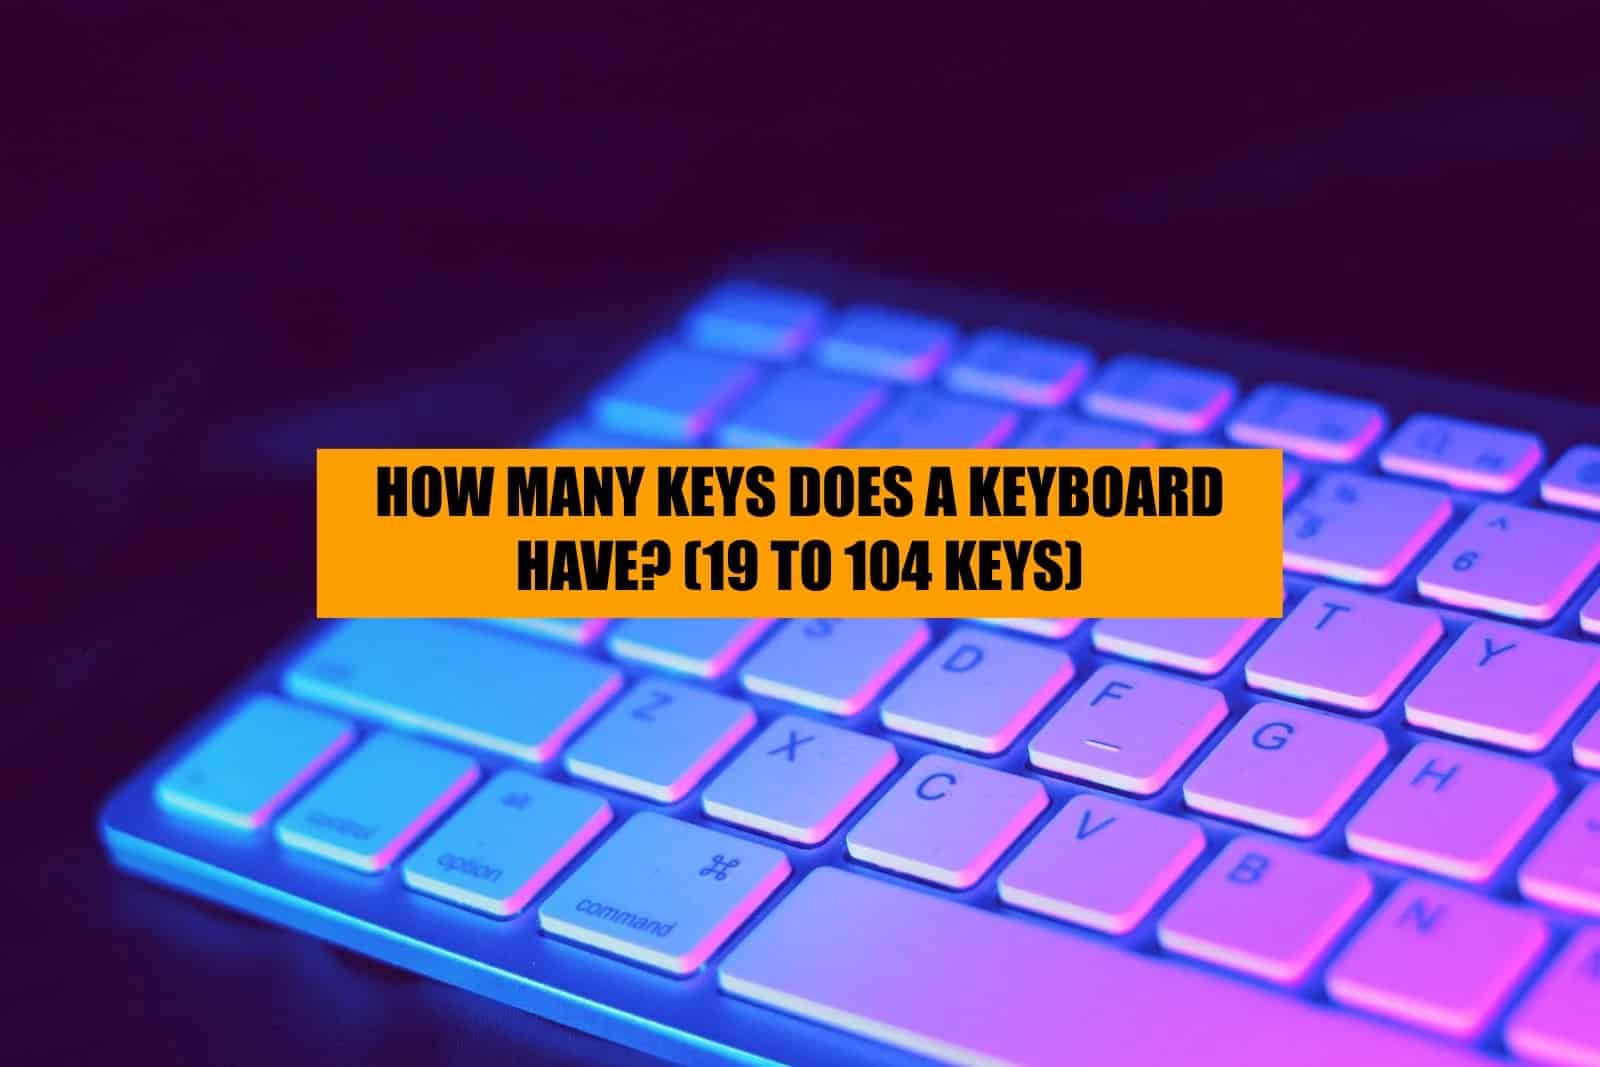 keyboards can have 19 to 104 keys depending on the layout of keyboard